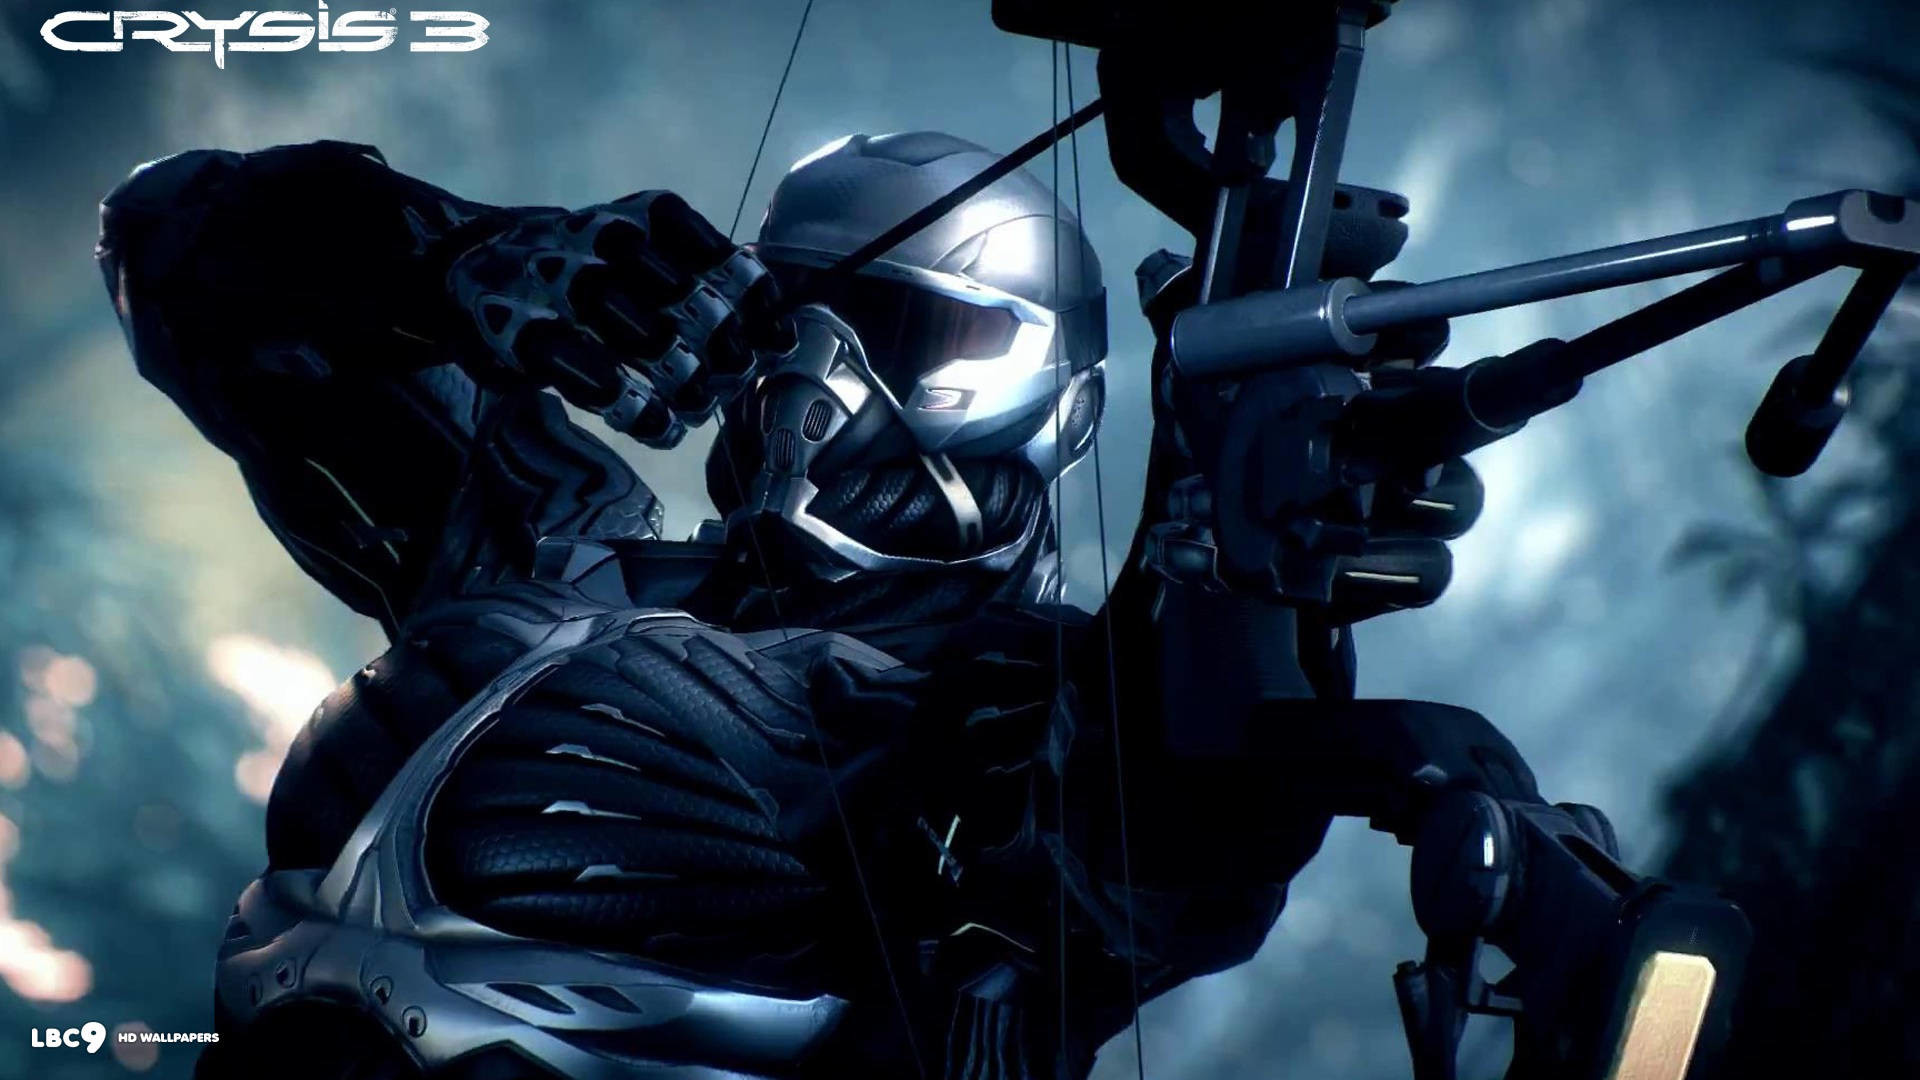 Crysis 3 2013 Game wallpapers 68 Wallpapers